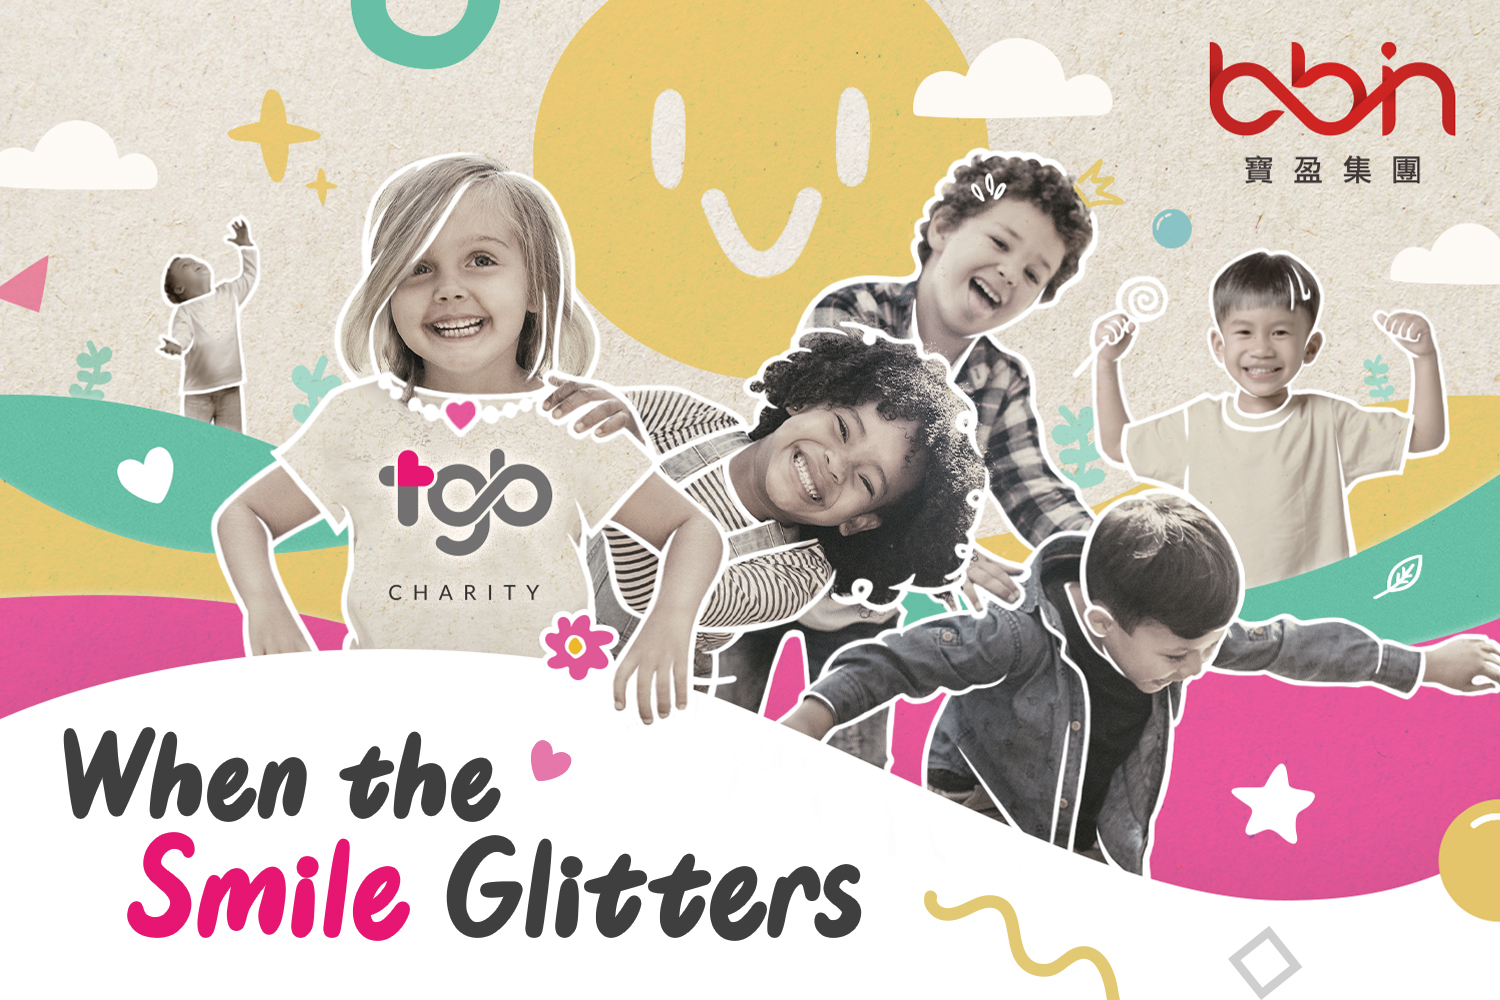 BBIN launches new charity campaign “When the Smile Glitters"